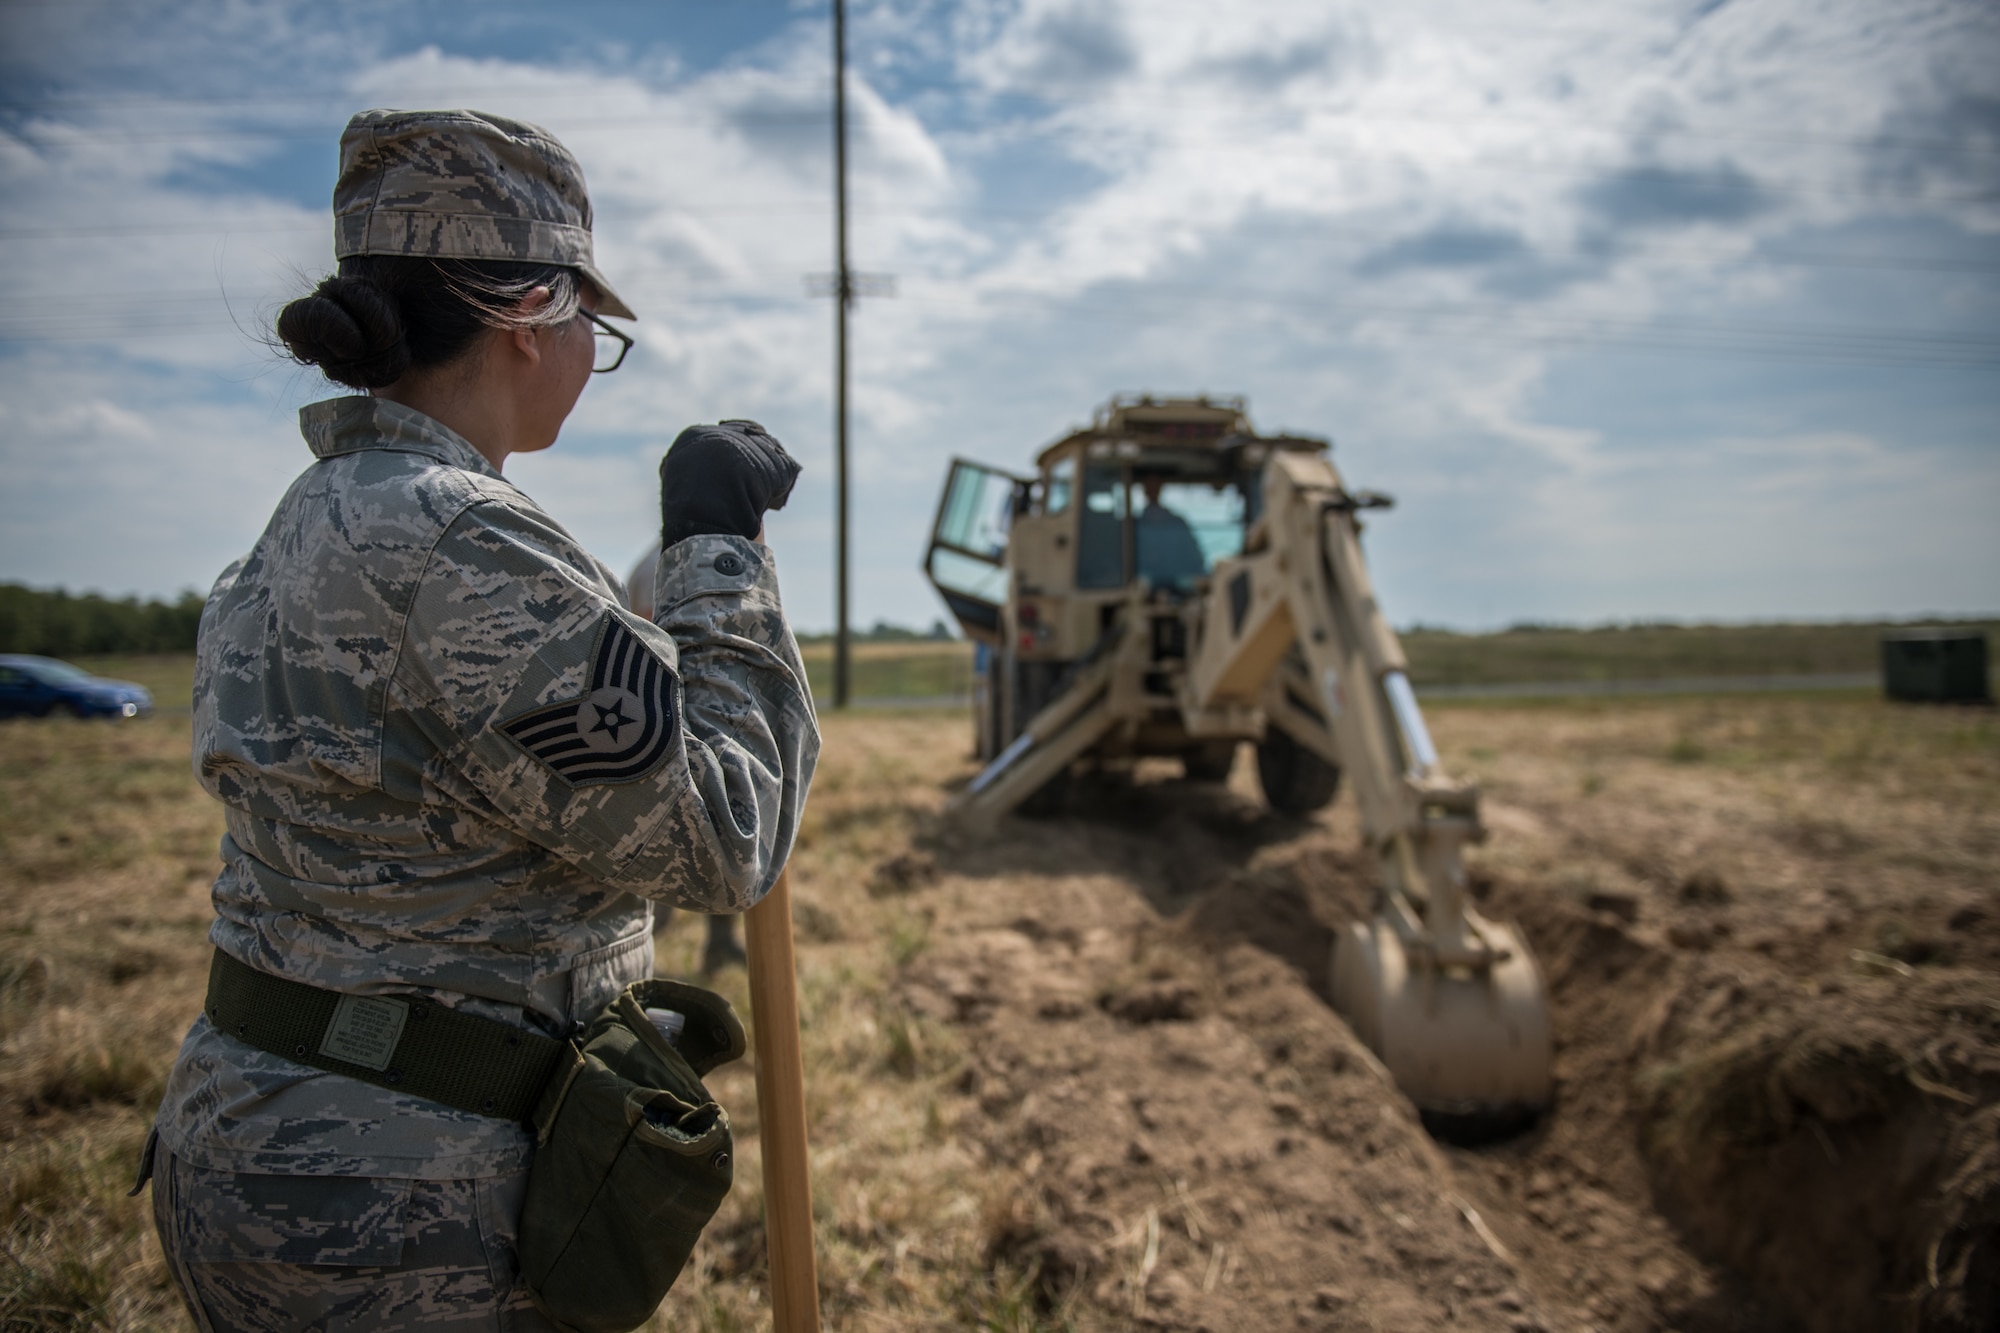 U.S. Air Force Reserve Citizen Airman Tech. Sgt. Tiana Corpuz looks on from a safe distance as Tech. Sgt. Casey Goodaker operates a backhoe to unearth a simulated water-main needing repairs during field training, Sept. 10, 2019 at the Sparta National Guard training area, Sparta, Illinois. The 932nd Civil Engineer Squadron spent two days at the training facility using the space for heavy equipment training, something they are not able to perform at Scott Air Force Base during unit training assemblies. (U.S. Air Force photo by Master Sgt. Christopher Parr)